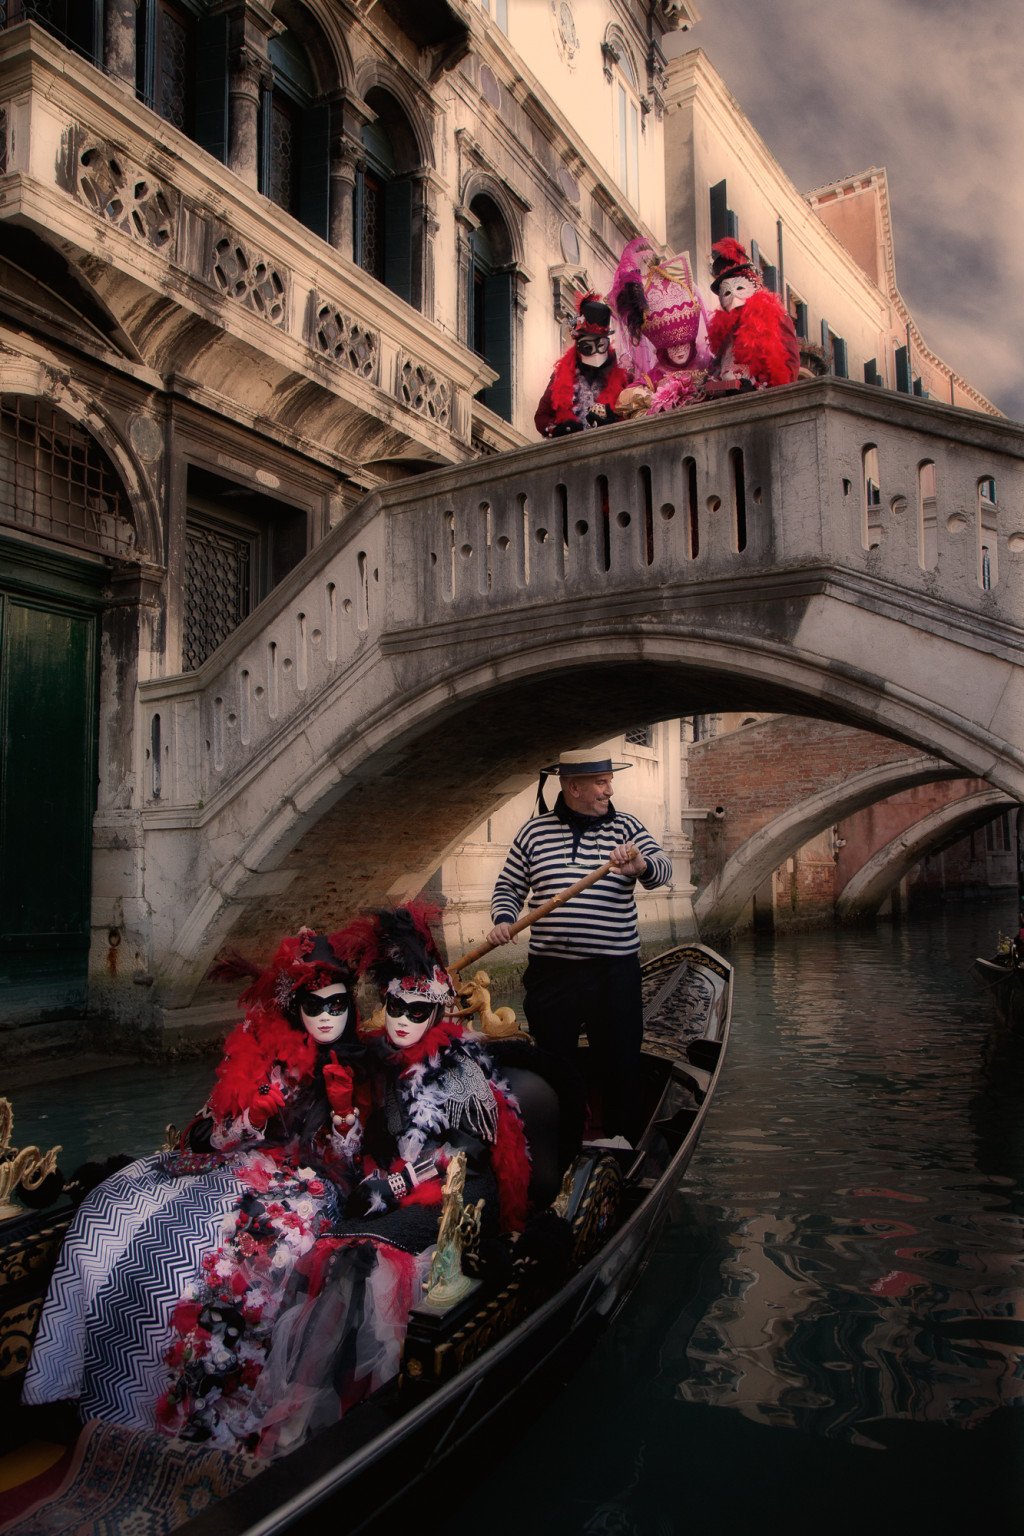 Carnival models riding in a gondola on a Venice canal